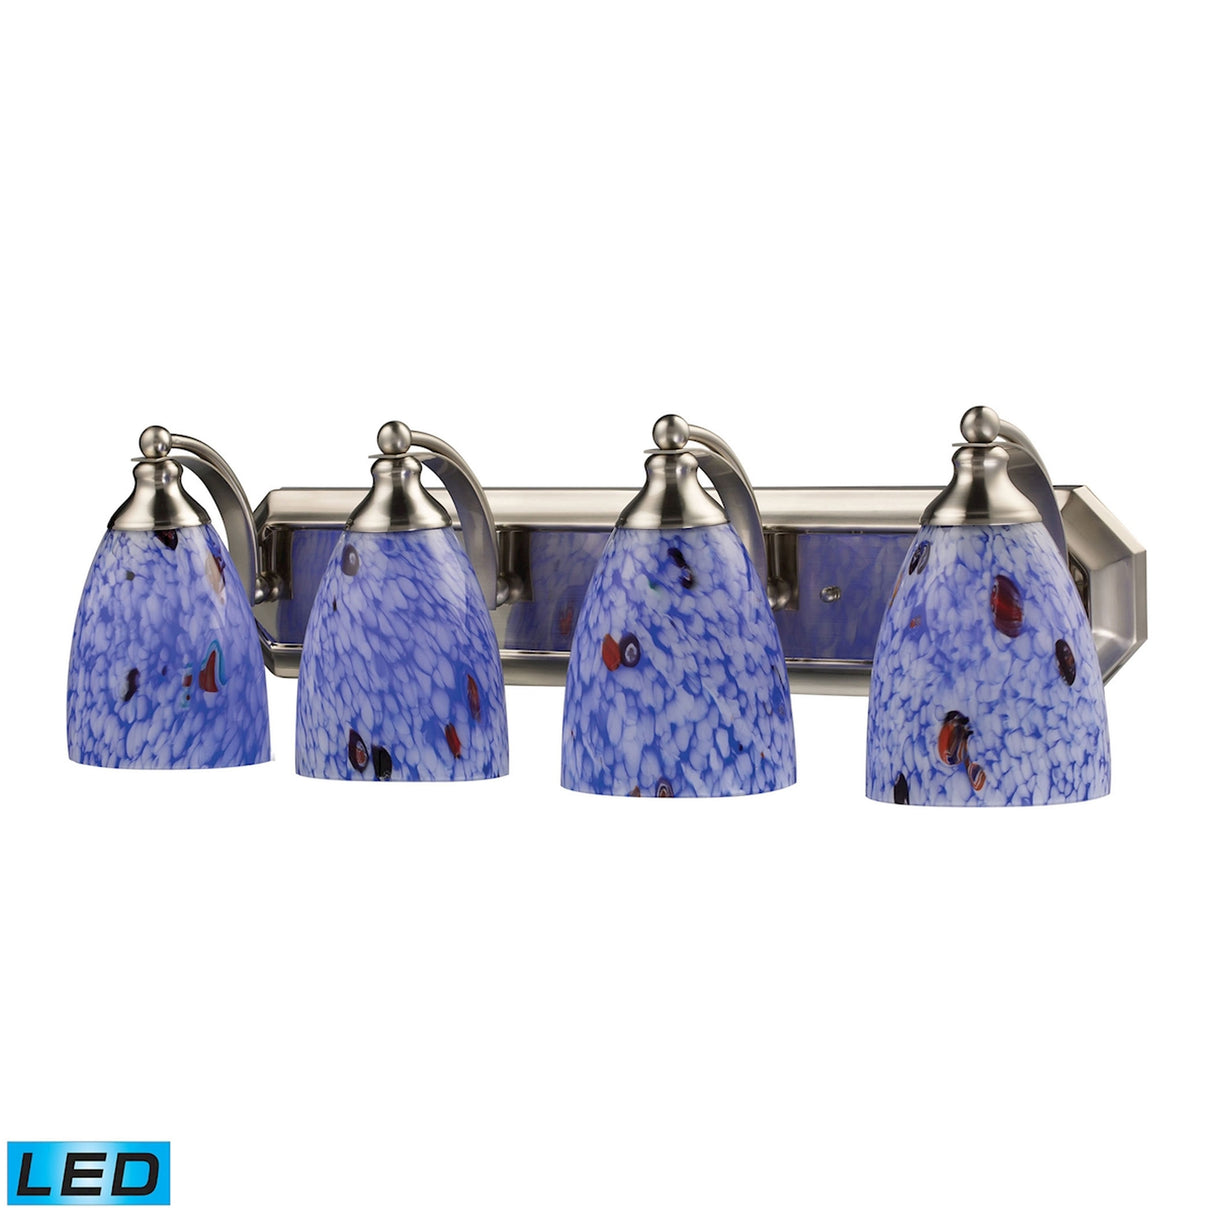 Elk 570-4N-BL-LED Mix-N-Match Vanity 4-Light Wall Lamp in Satin Nickel with Starburst Blue Glass - Includes LED Bulbs